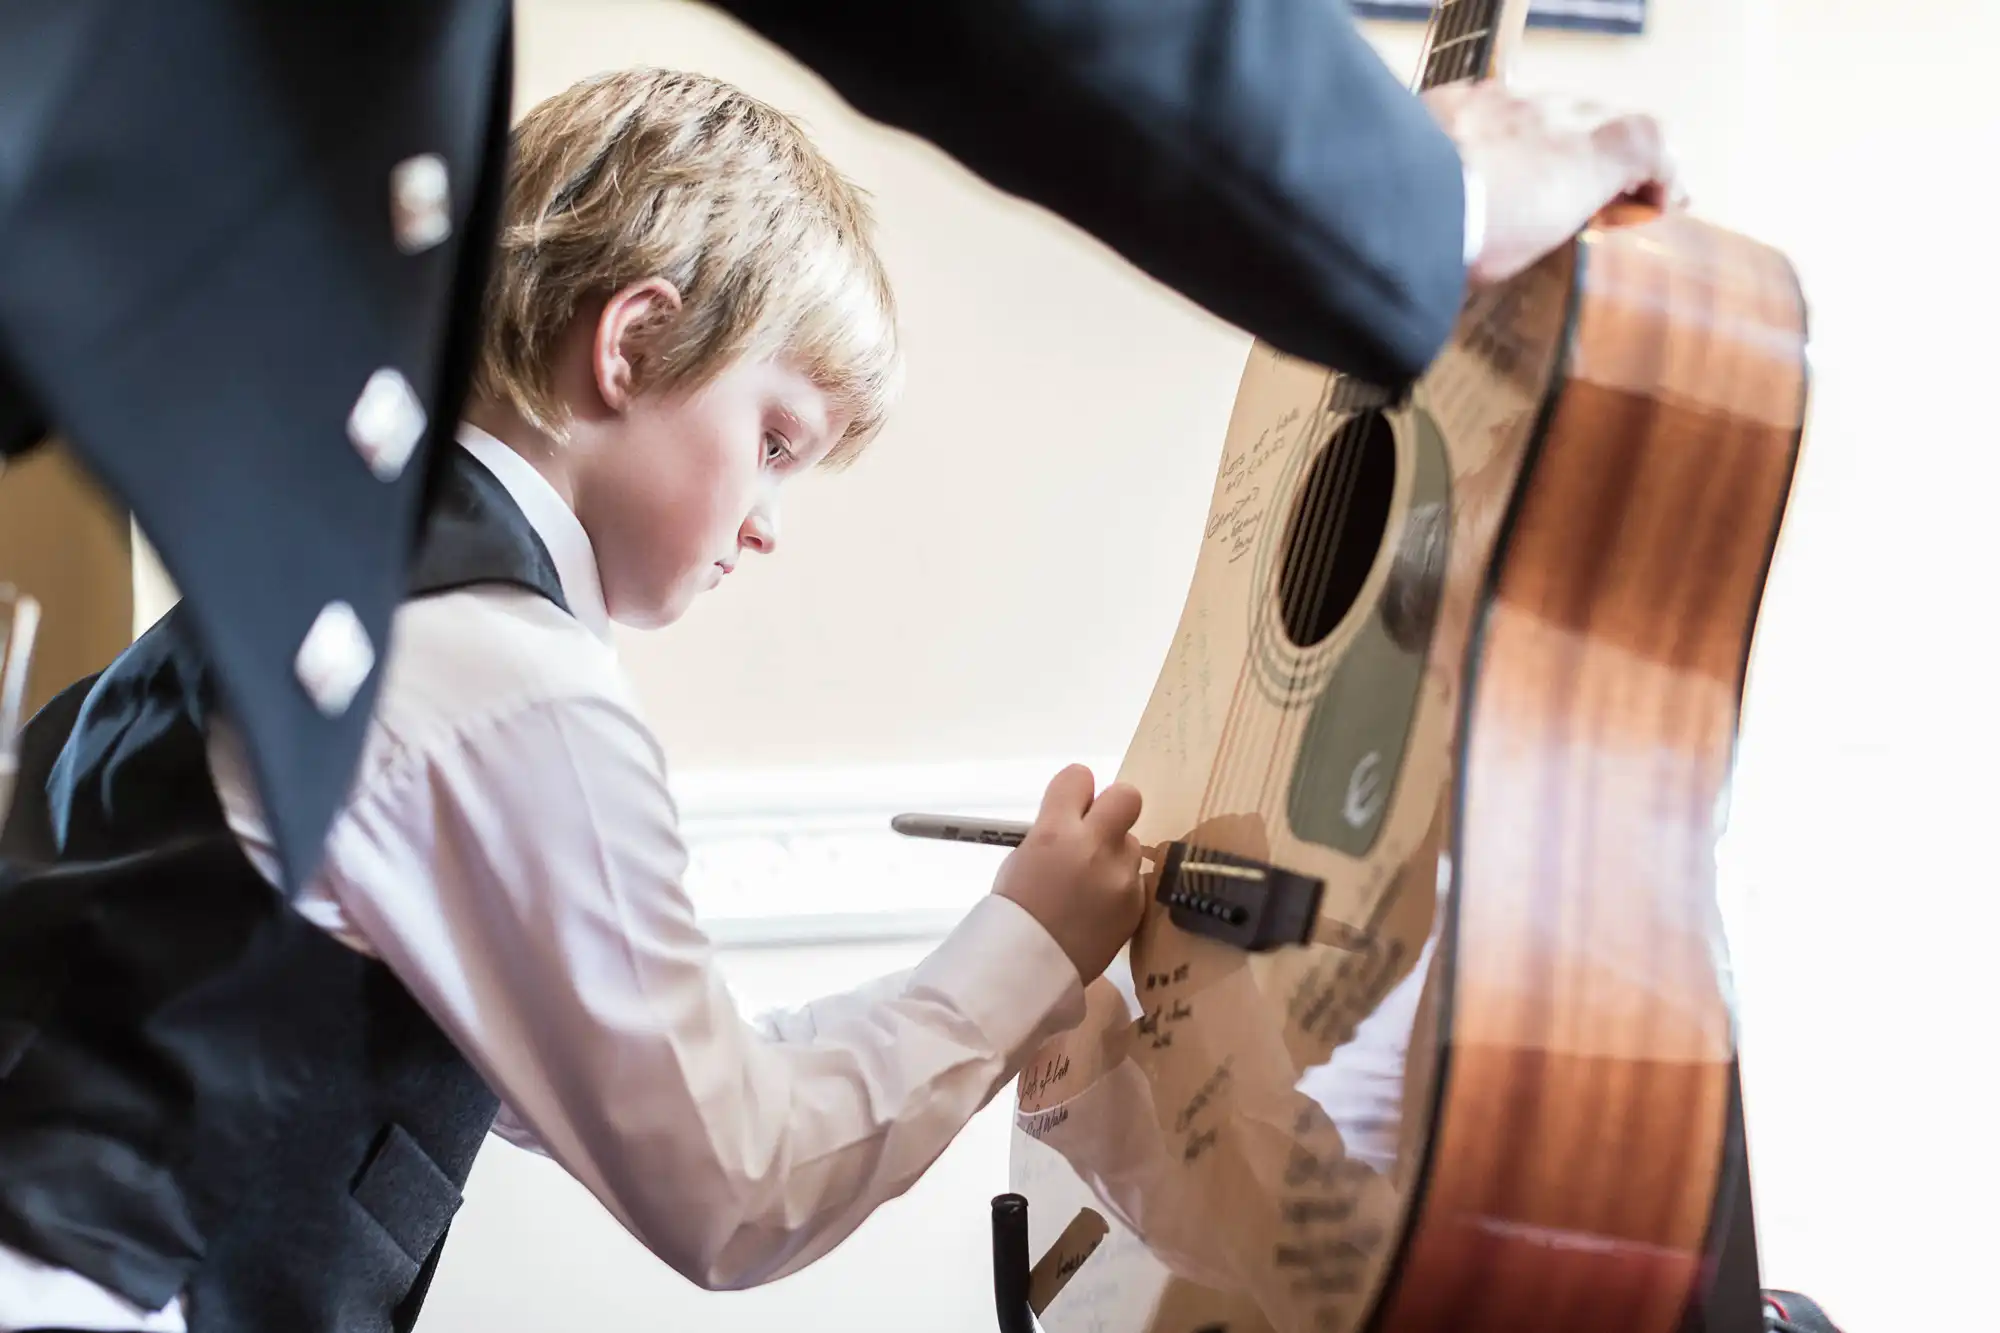 A young boy in a suit signs an acoustic guitar while looking intently at where he writes.